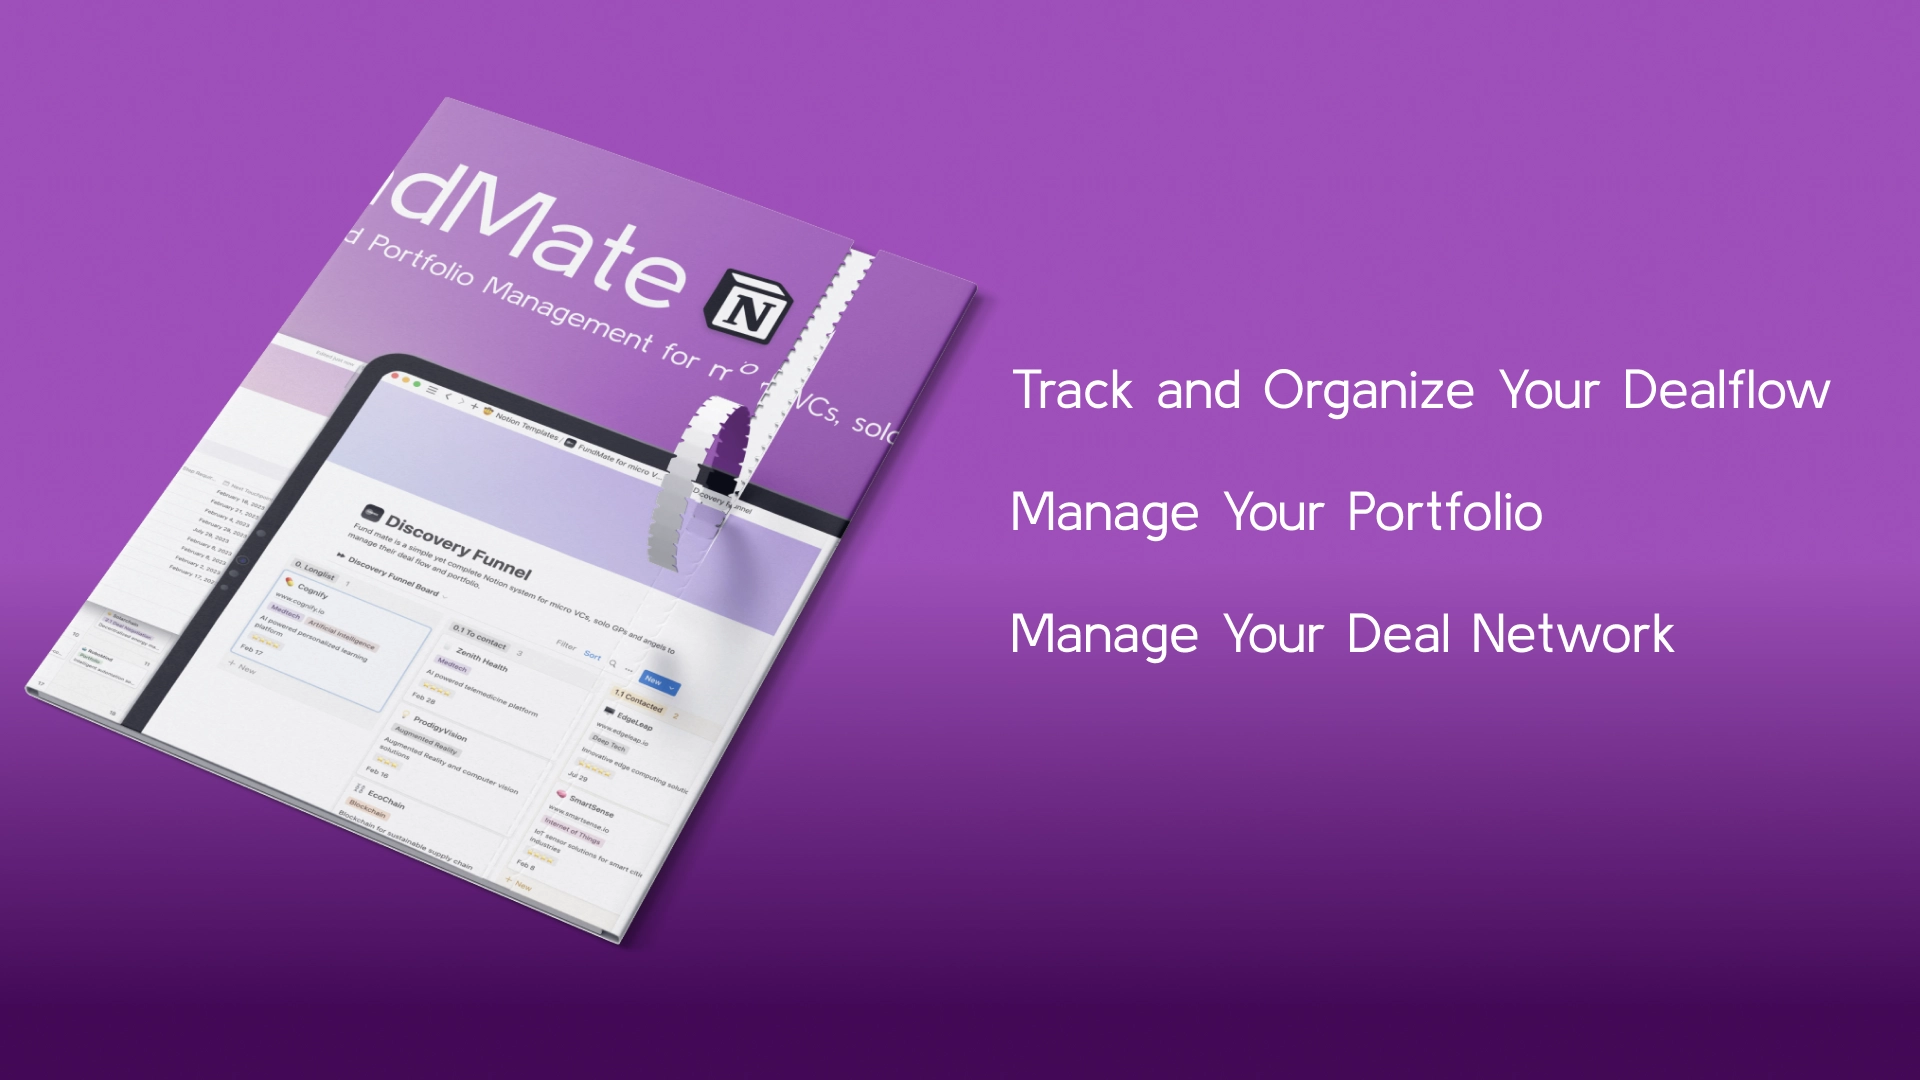 Fundmate - Notion Crm For Micro Vcs, Solo Gps And Angels